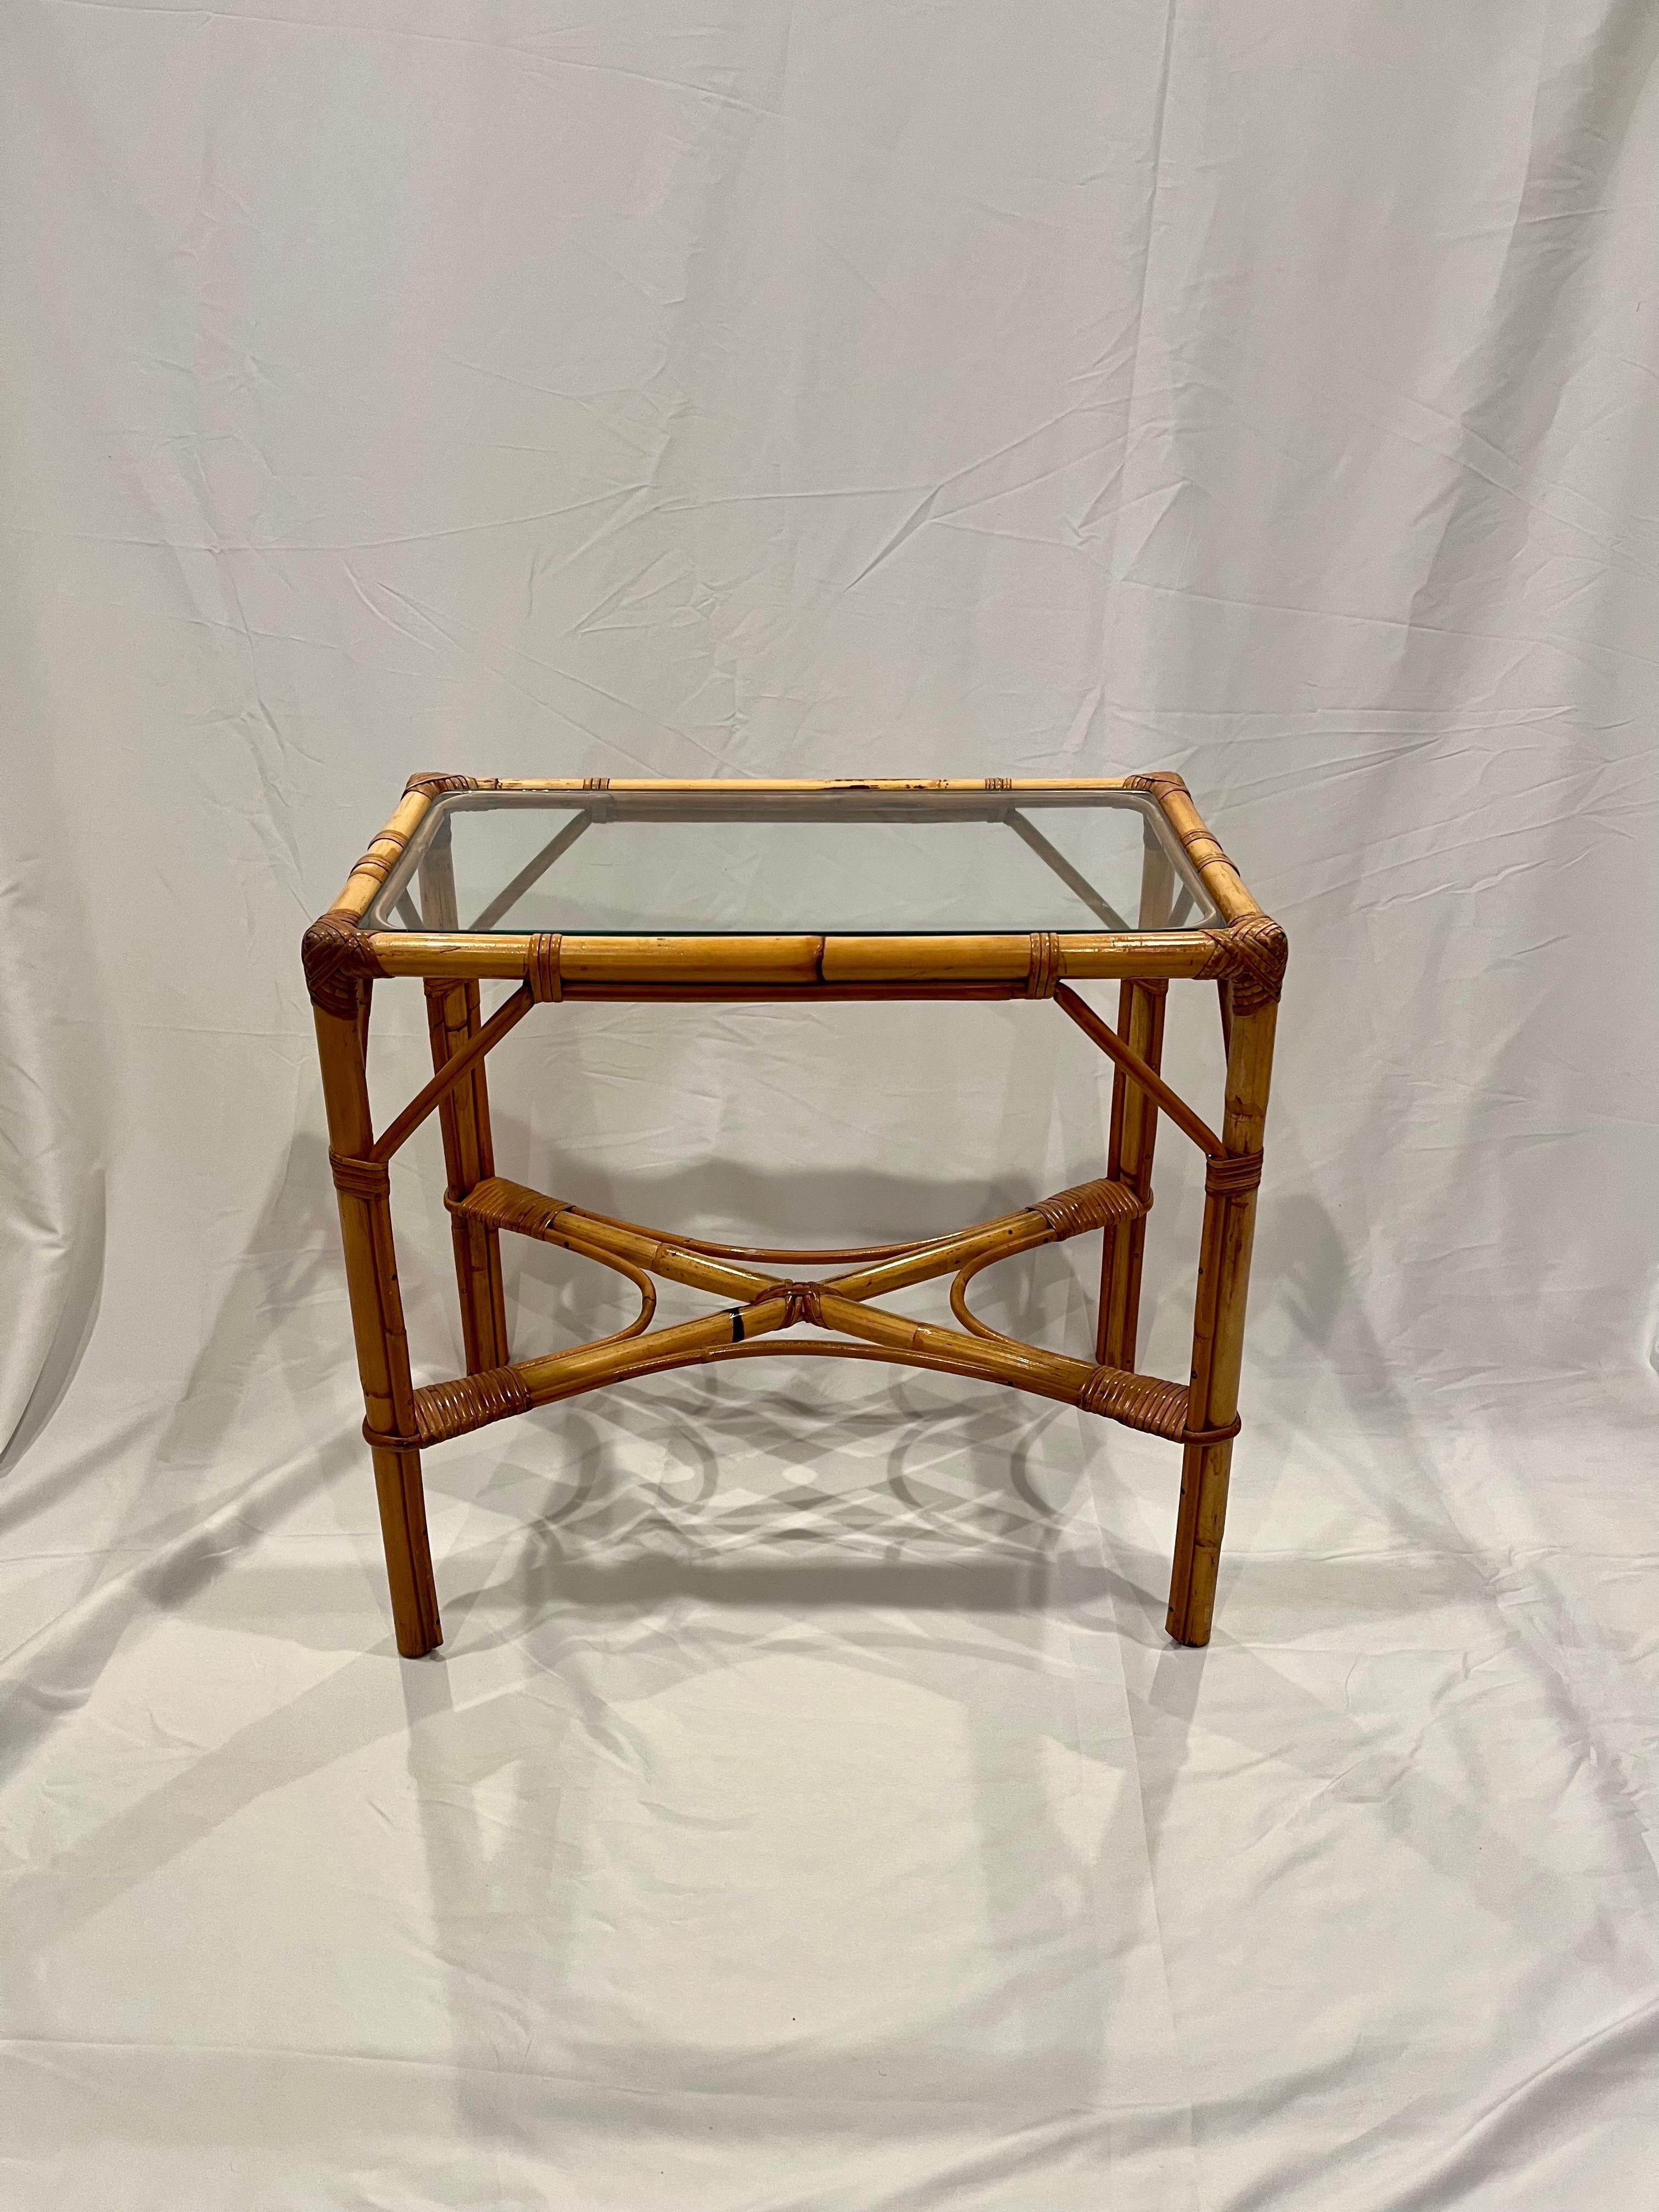 Splendid rattan side table with glass top. Great proportions and wrappings with x base stretcher. Simple yet sophisticated.
Curbside to NYC/Philly $400